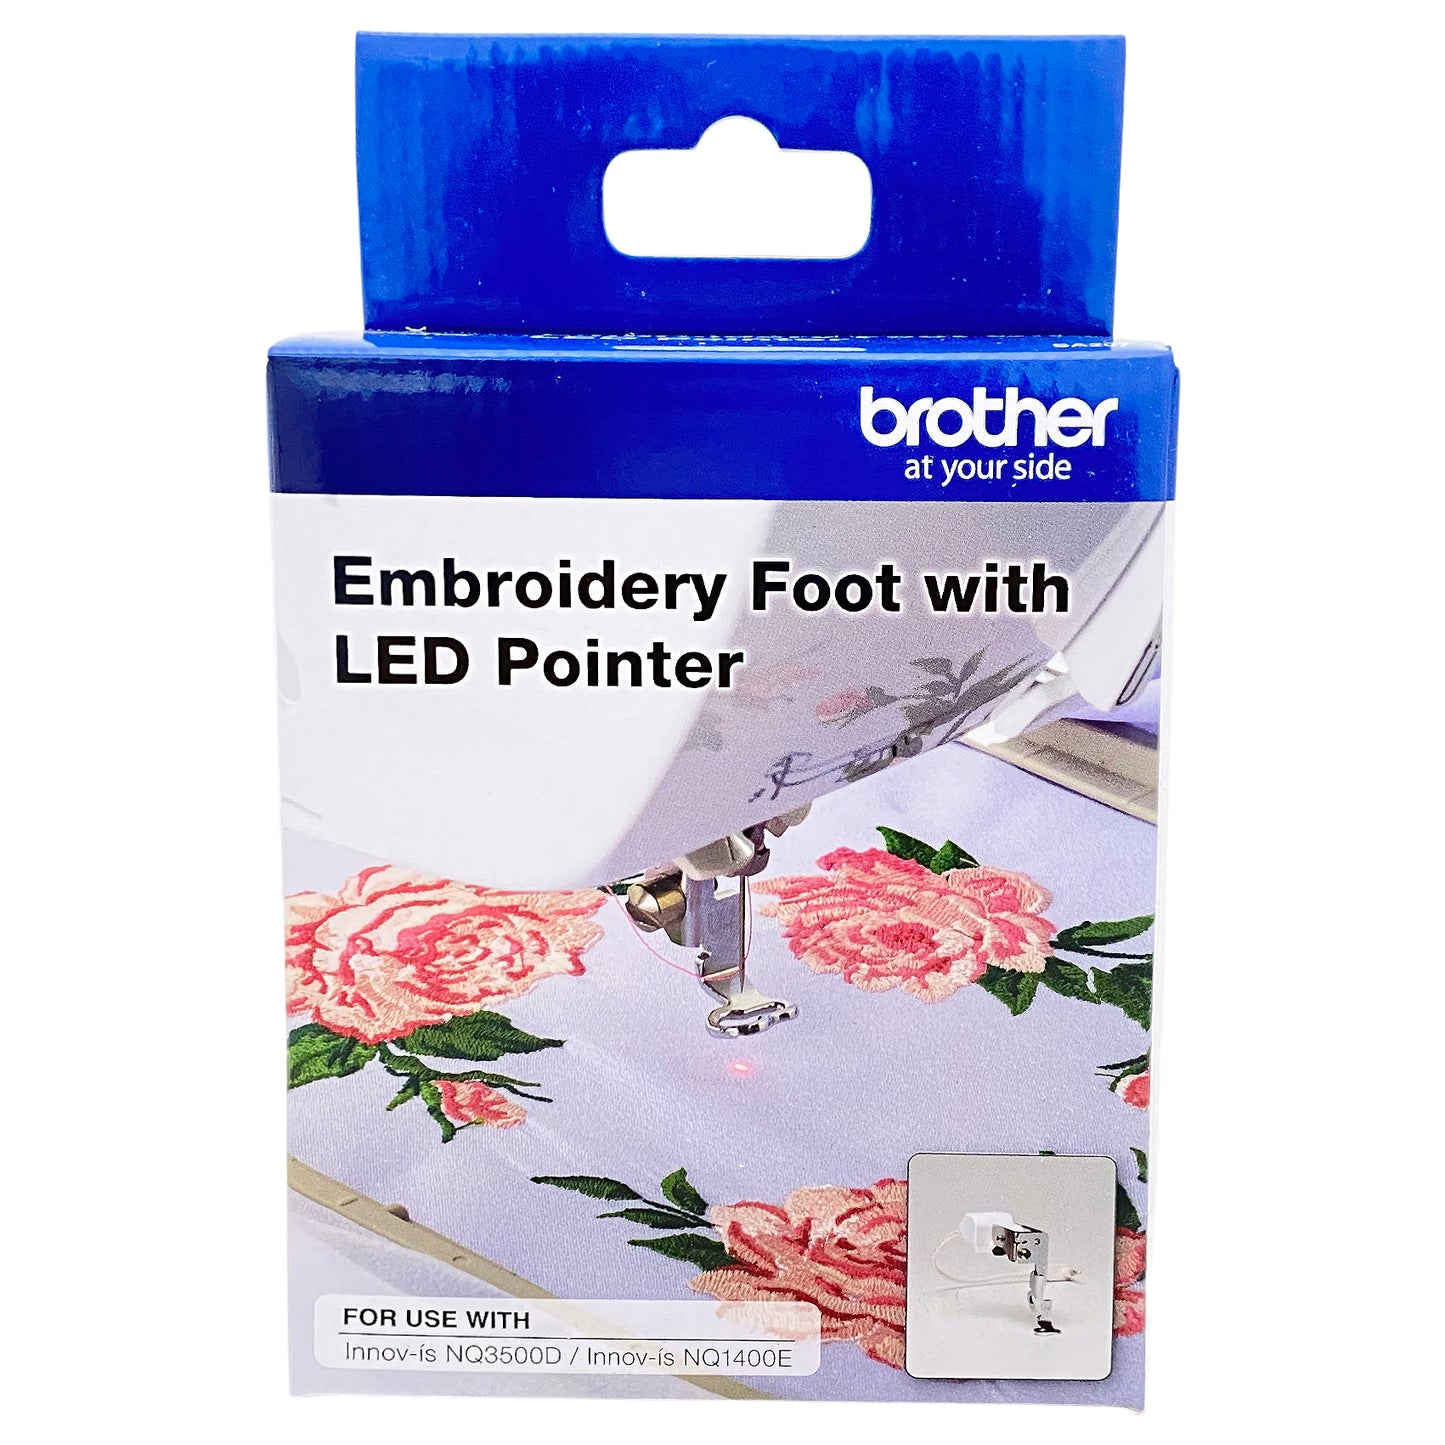 Embroidery Foot with LED Pointer